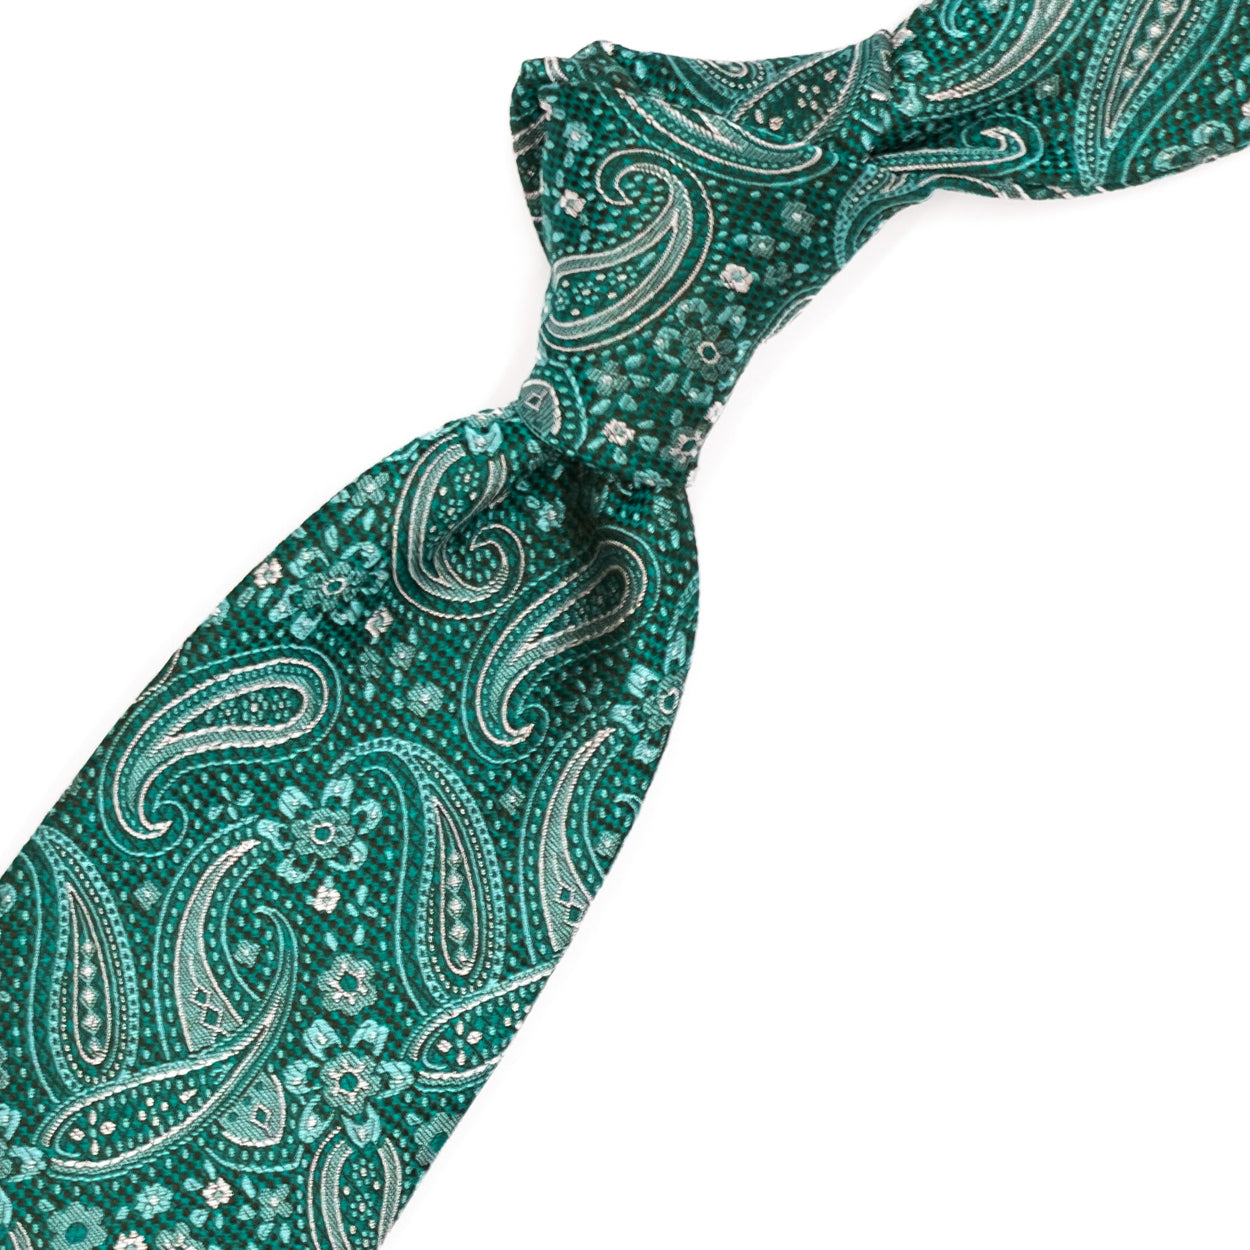 Green tie with paisley